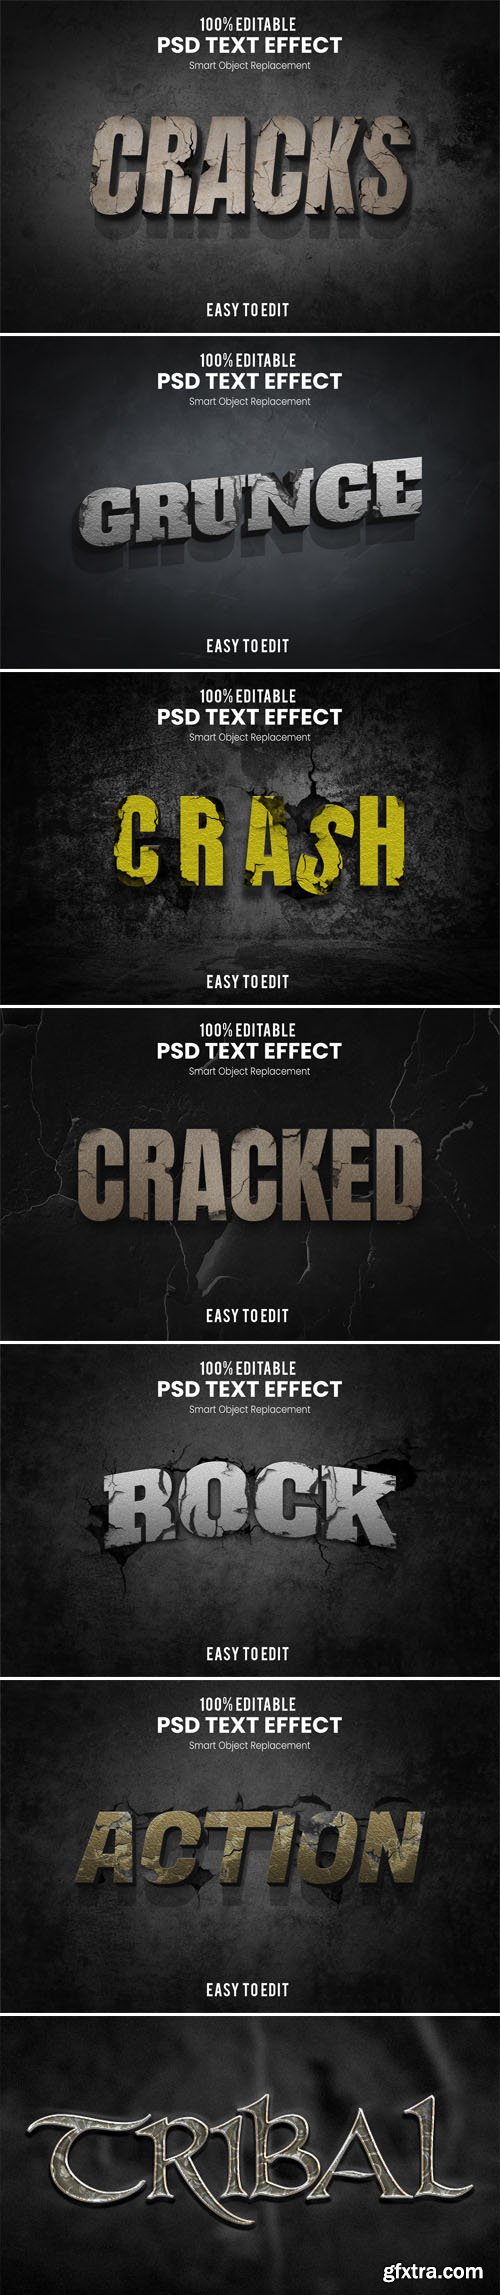 7 Grunge and Cracks PSD Text Effects